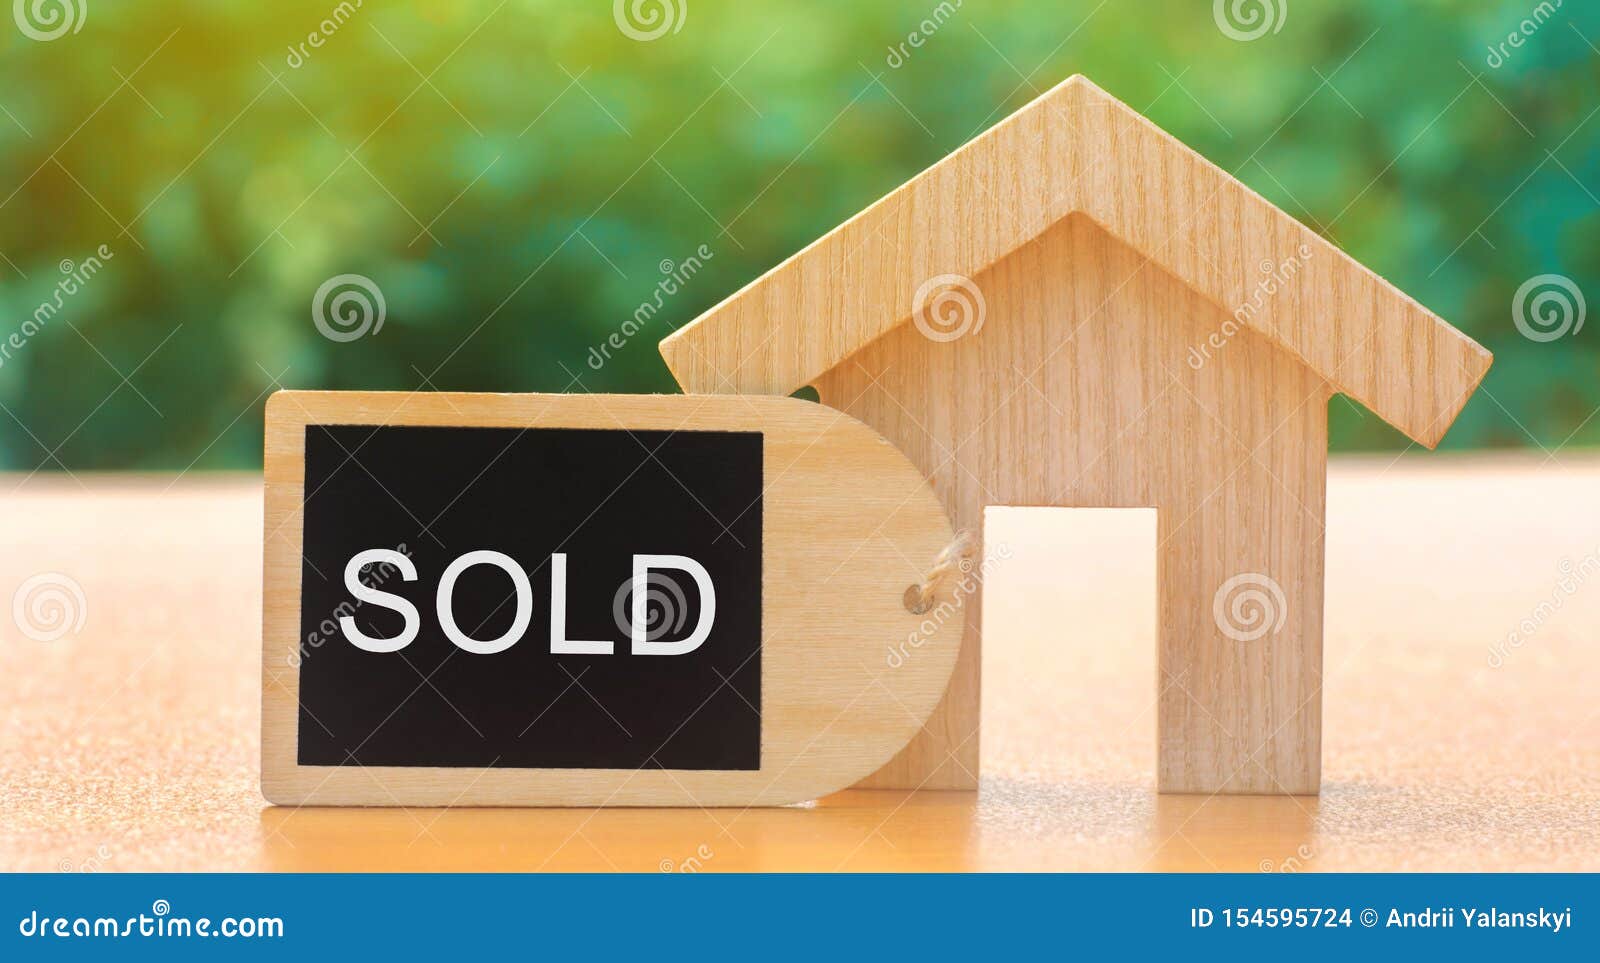 a miniature wooden house and inscription sold. the concept of selling a home or apartment. property for sale. affordable housing.